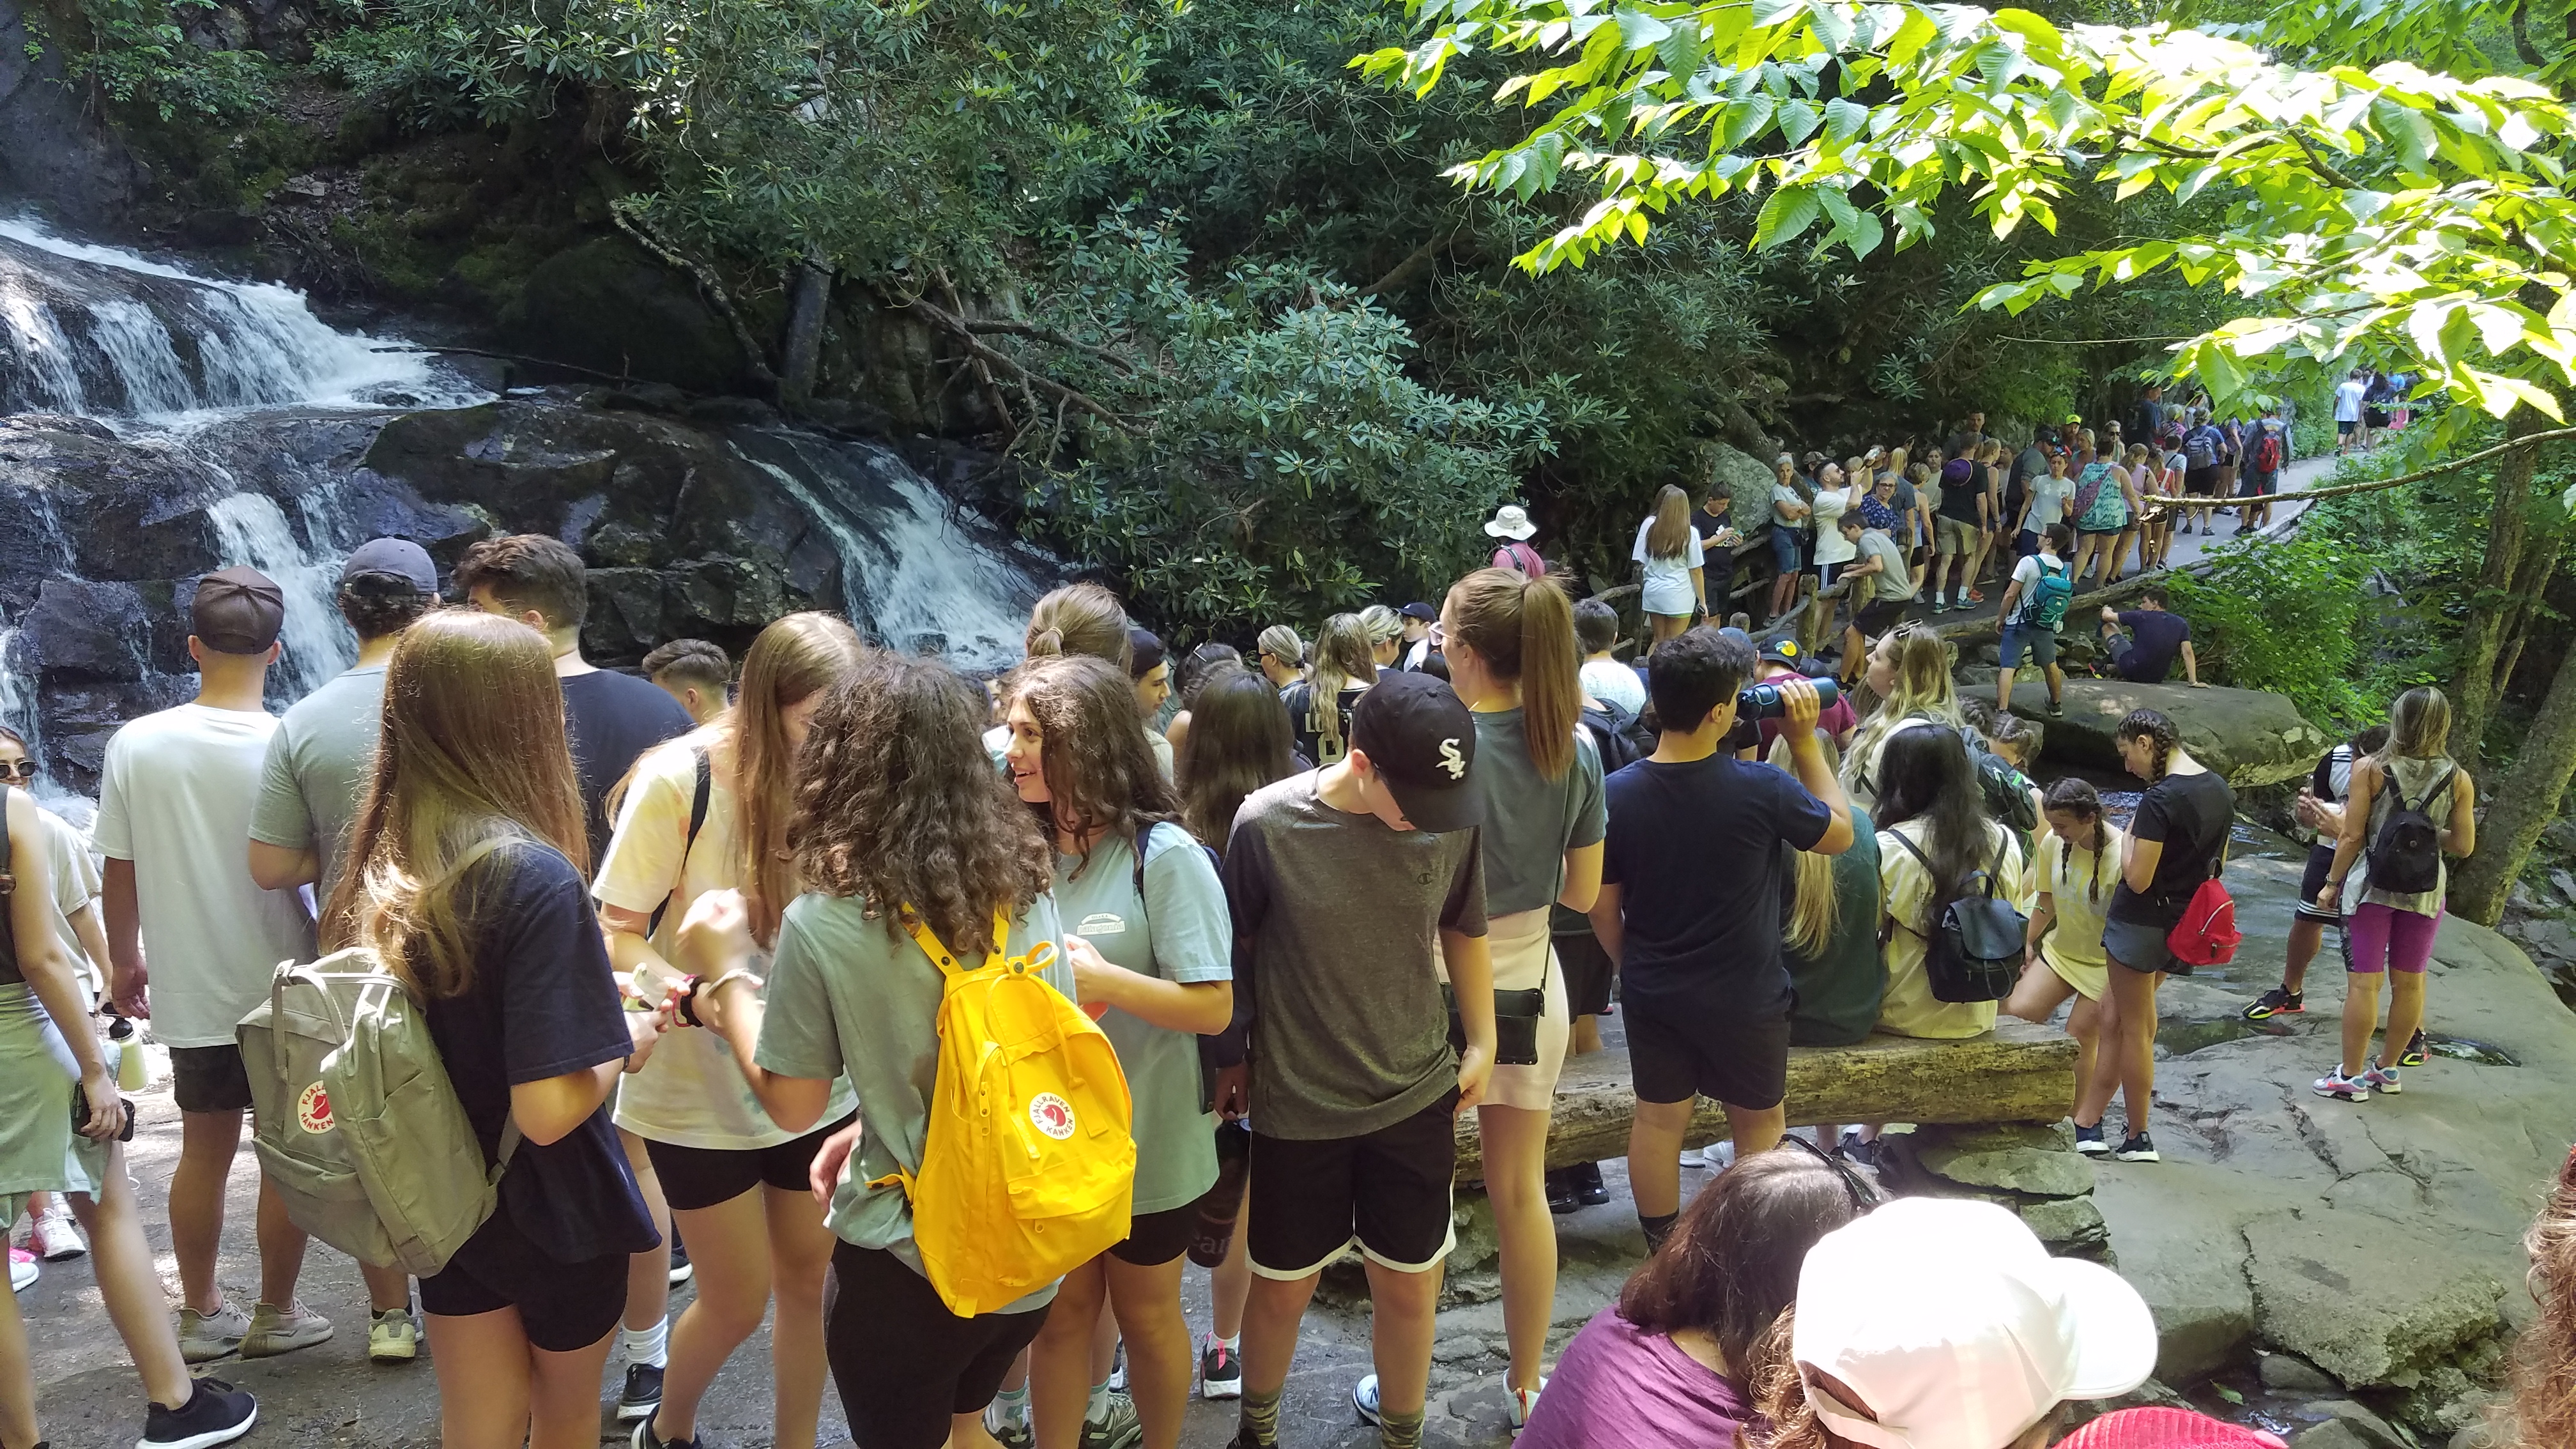 A large group of visitors stands in front of a waterfall.